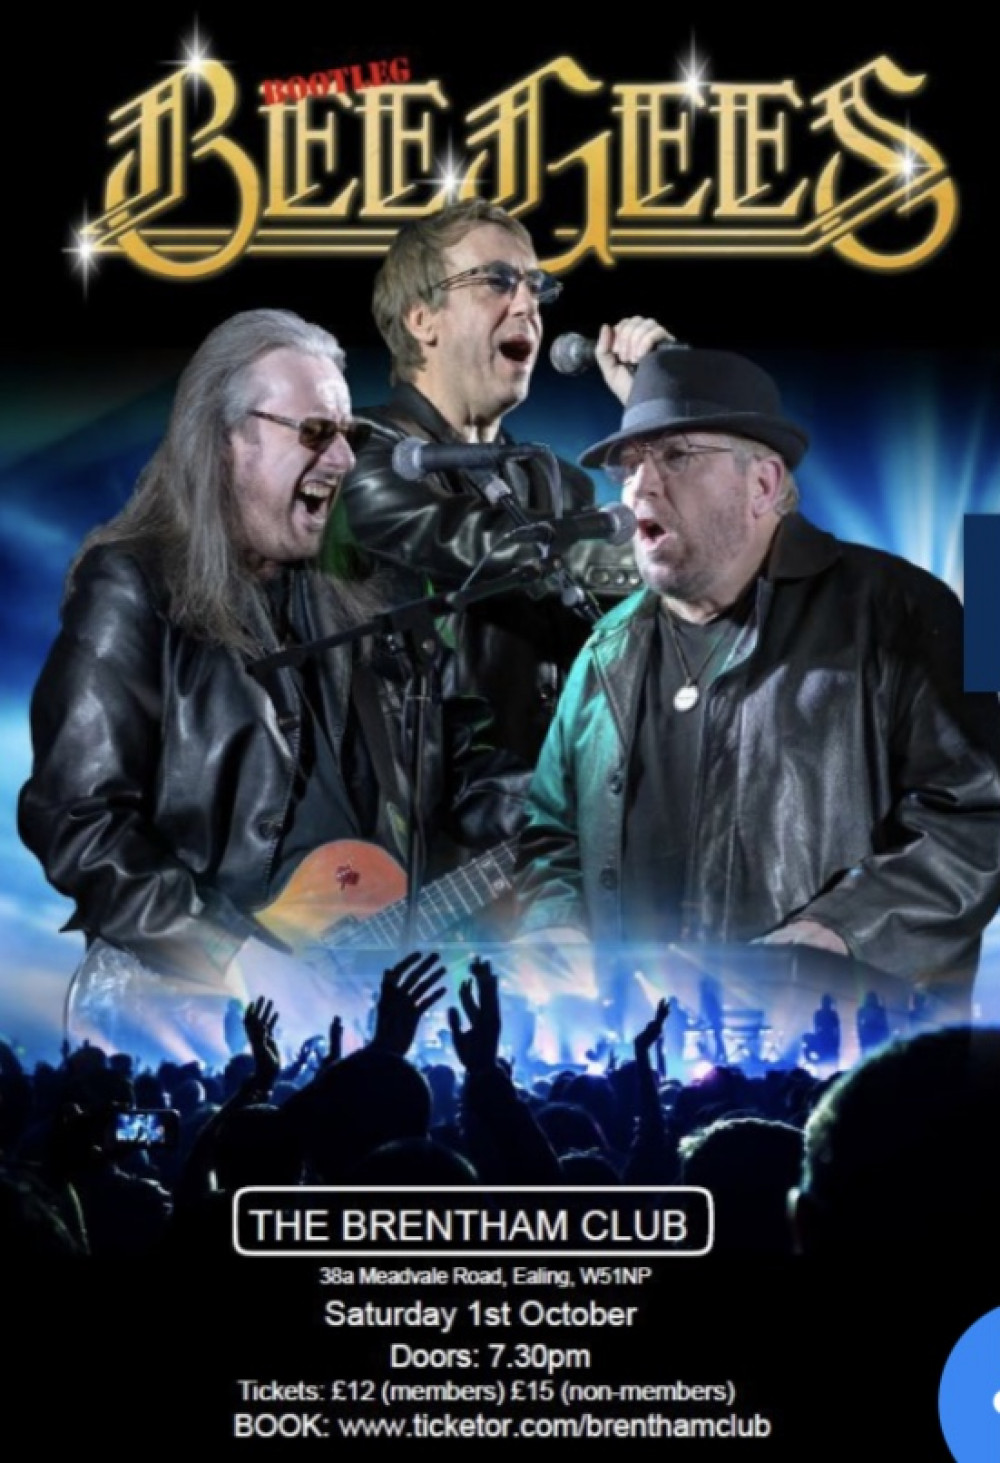 THE BOOT LEG BEE GEES AT THE BRENTHAM CLUB